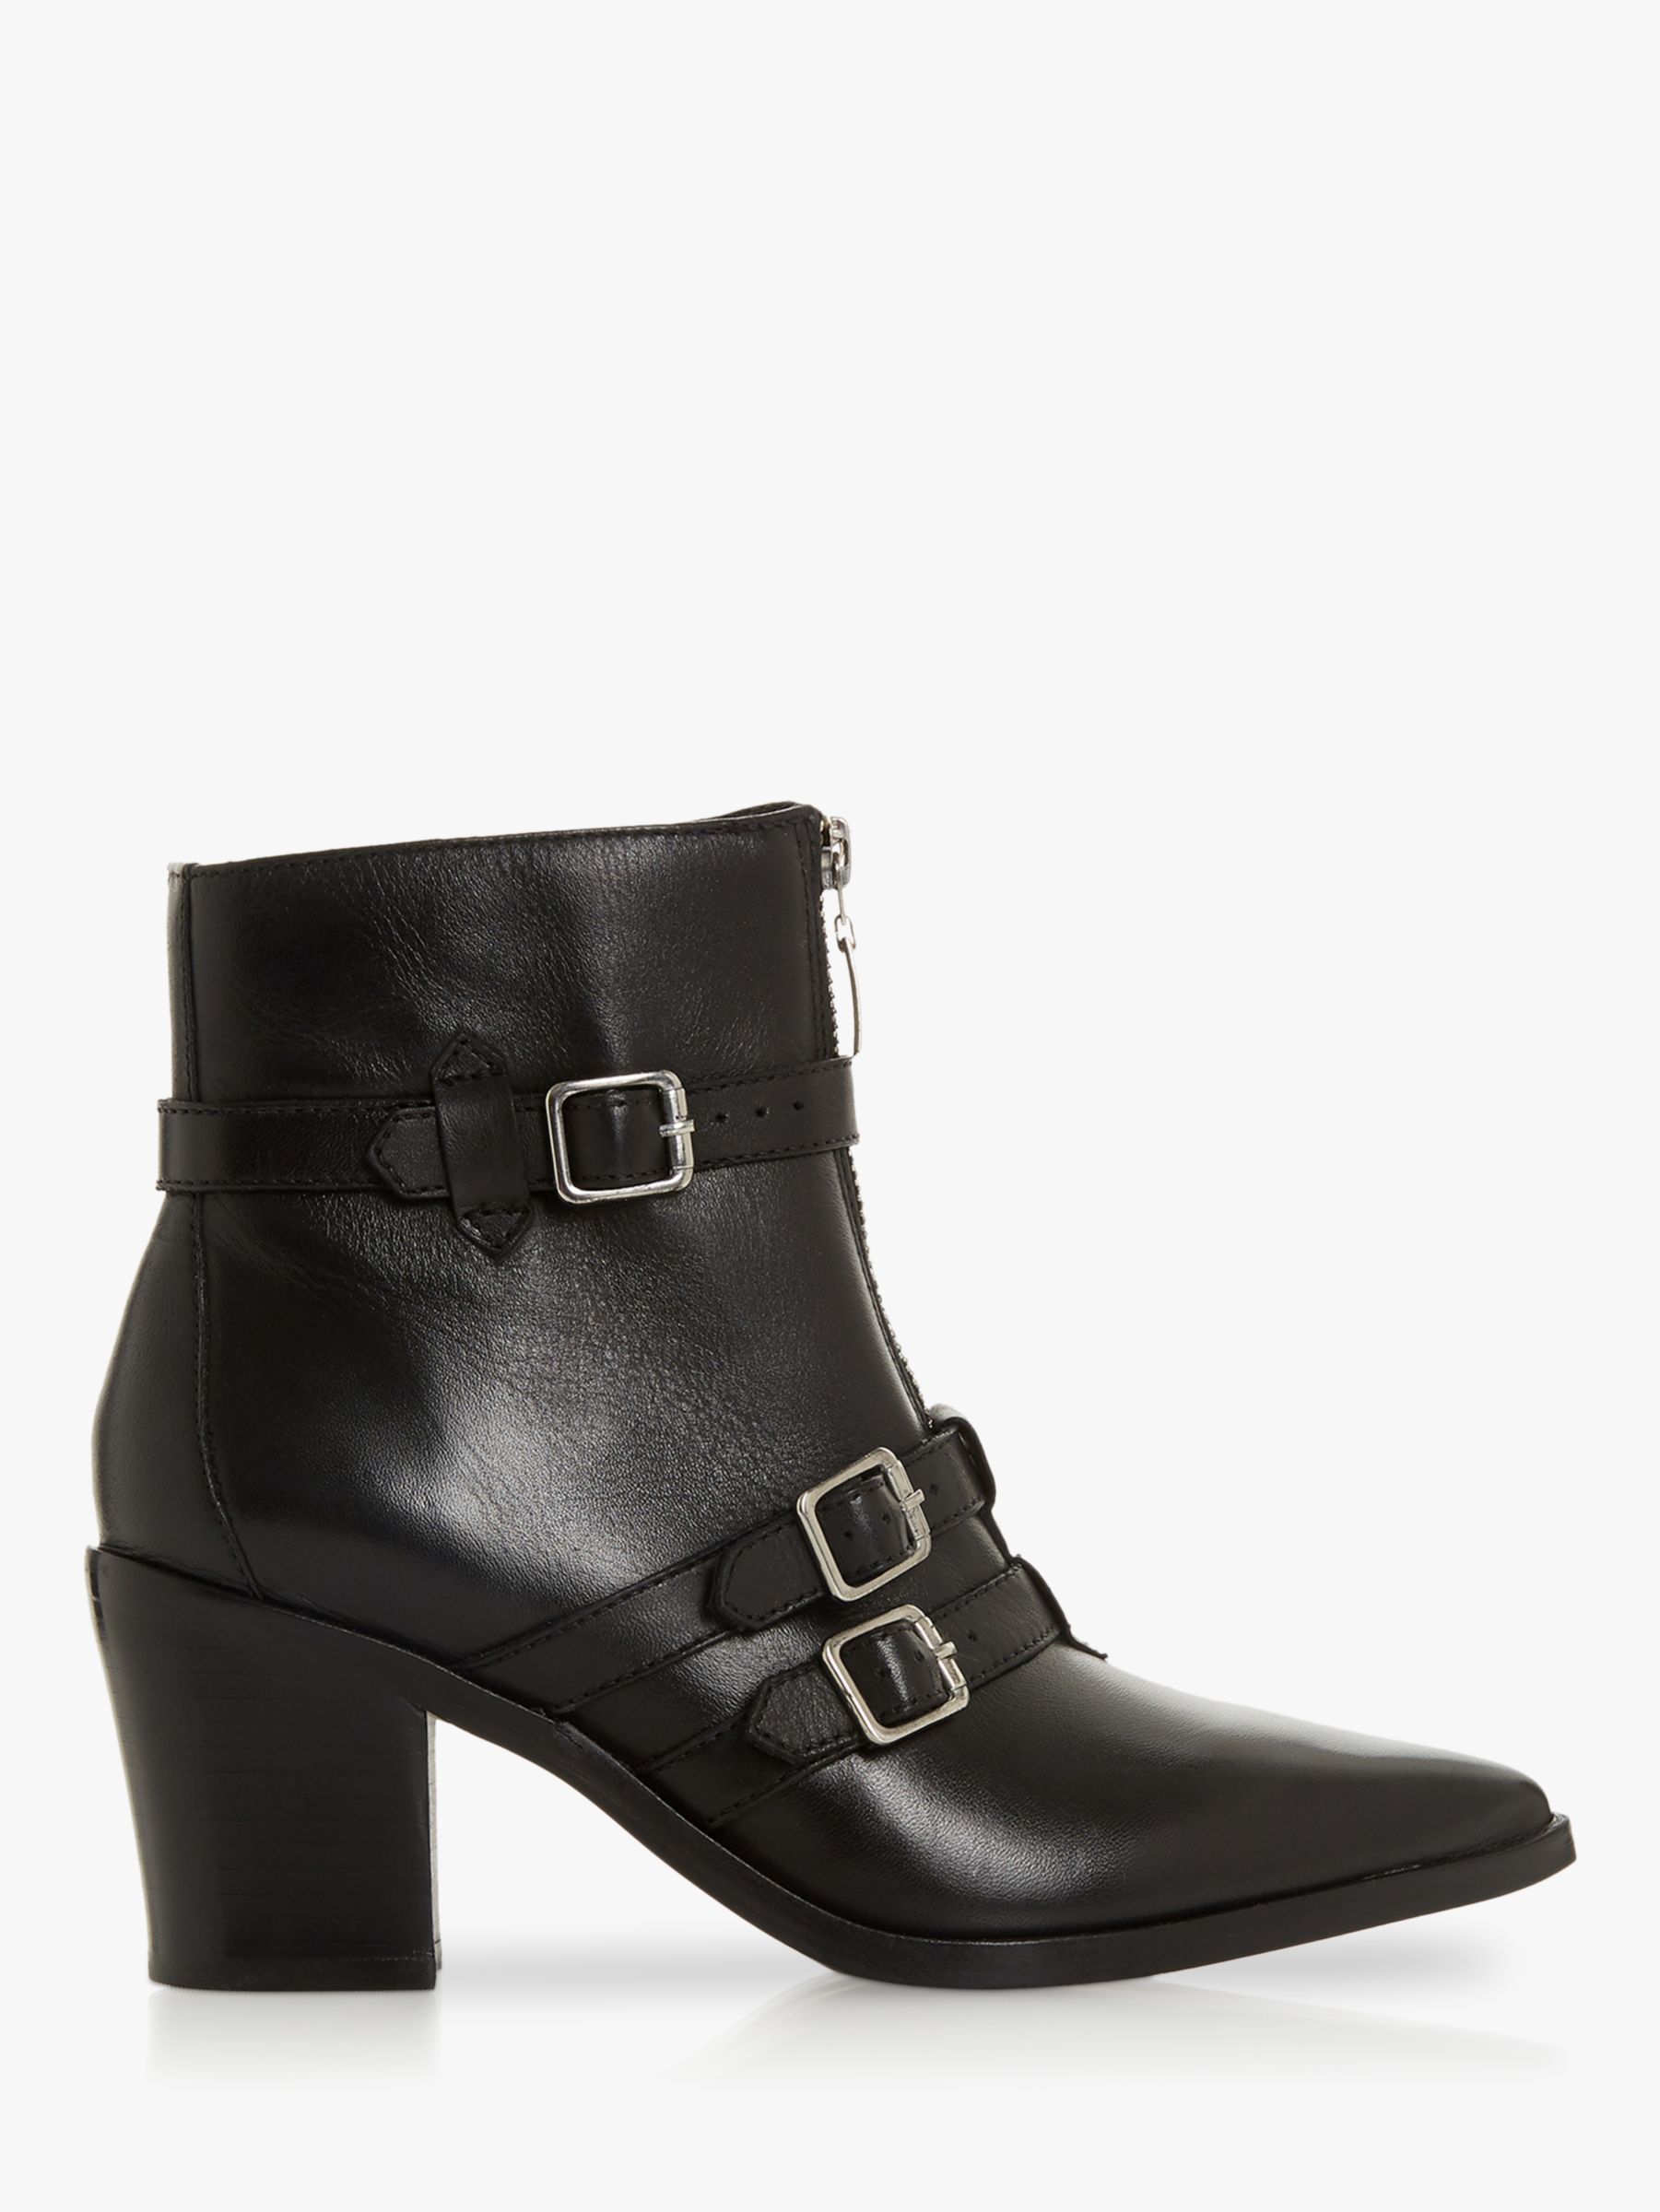 Dune Princely Block Heel Ankle Boots, Black Leather at John Lewis ...